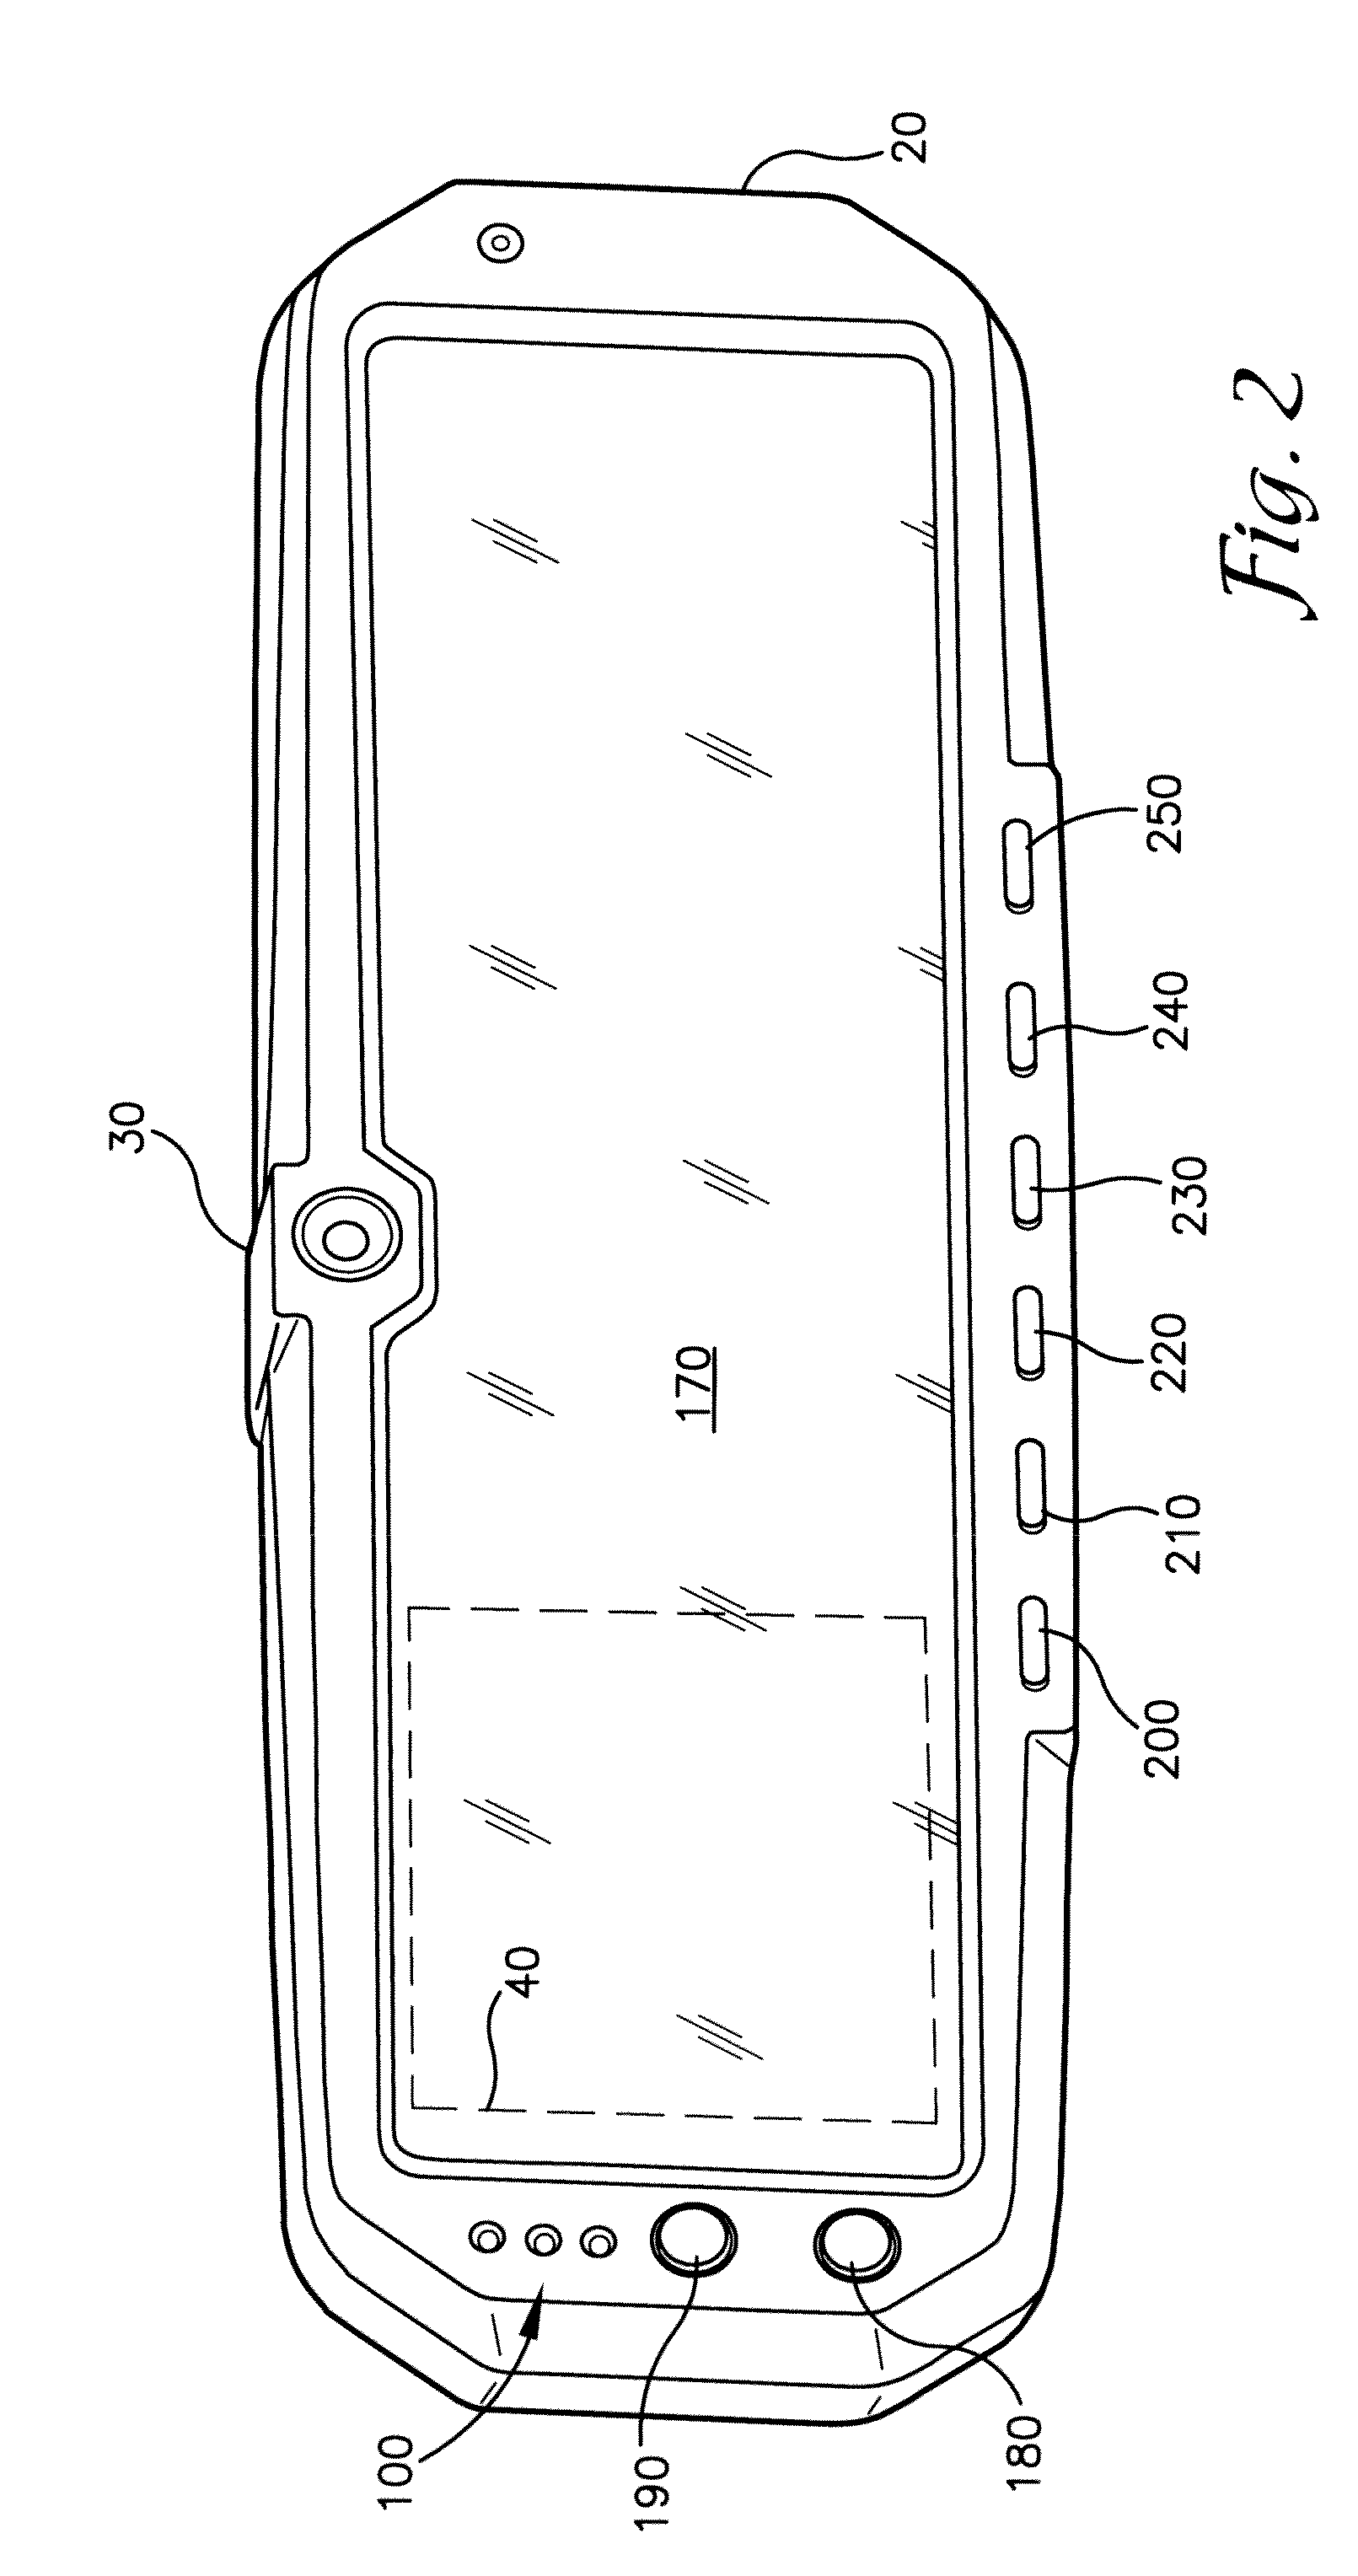 Vehicle-mounted video system with distributed processing